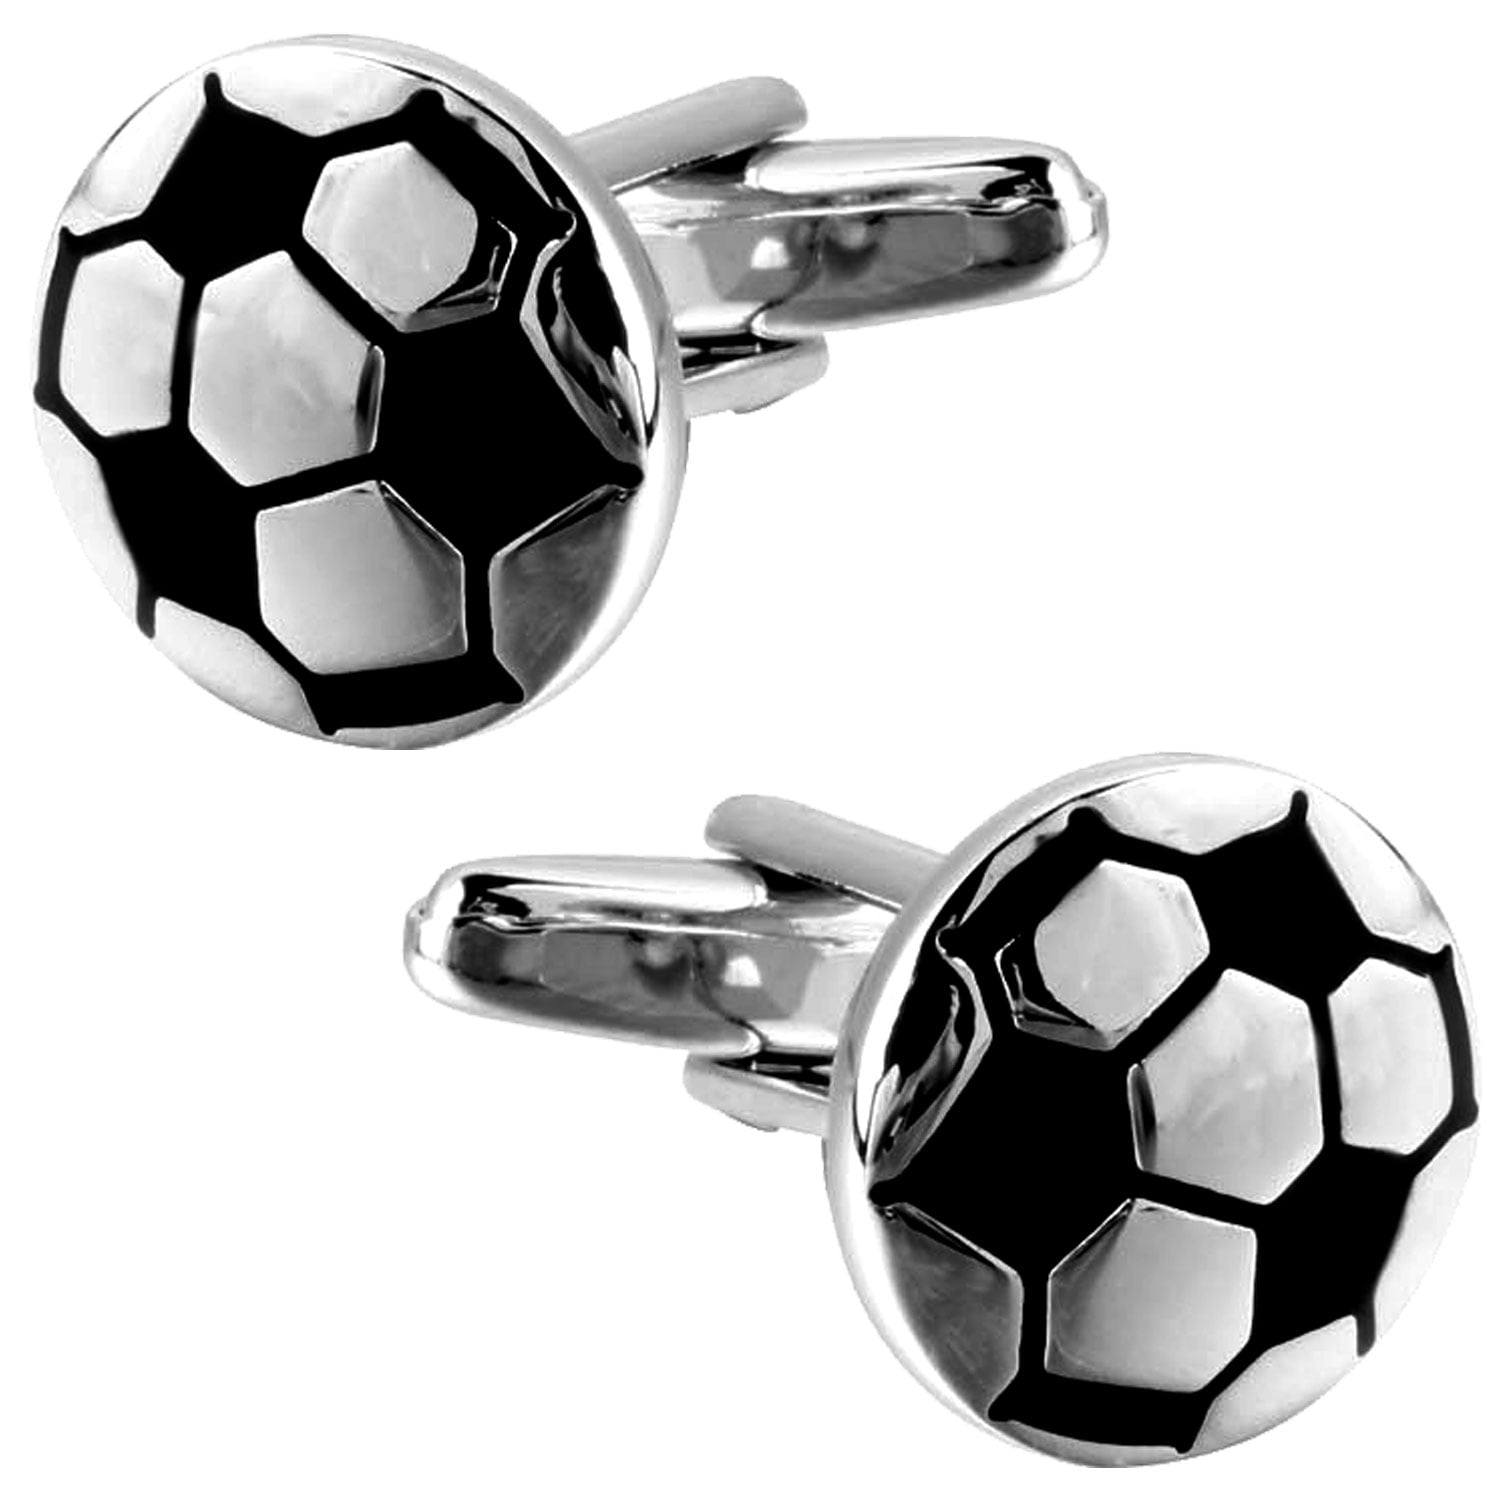 Soccer player Sport jewelry gift Silver 925 Sterling silver pendant with a pair of soccer boots design Soccer ball Soccer shoe